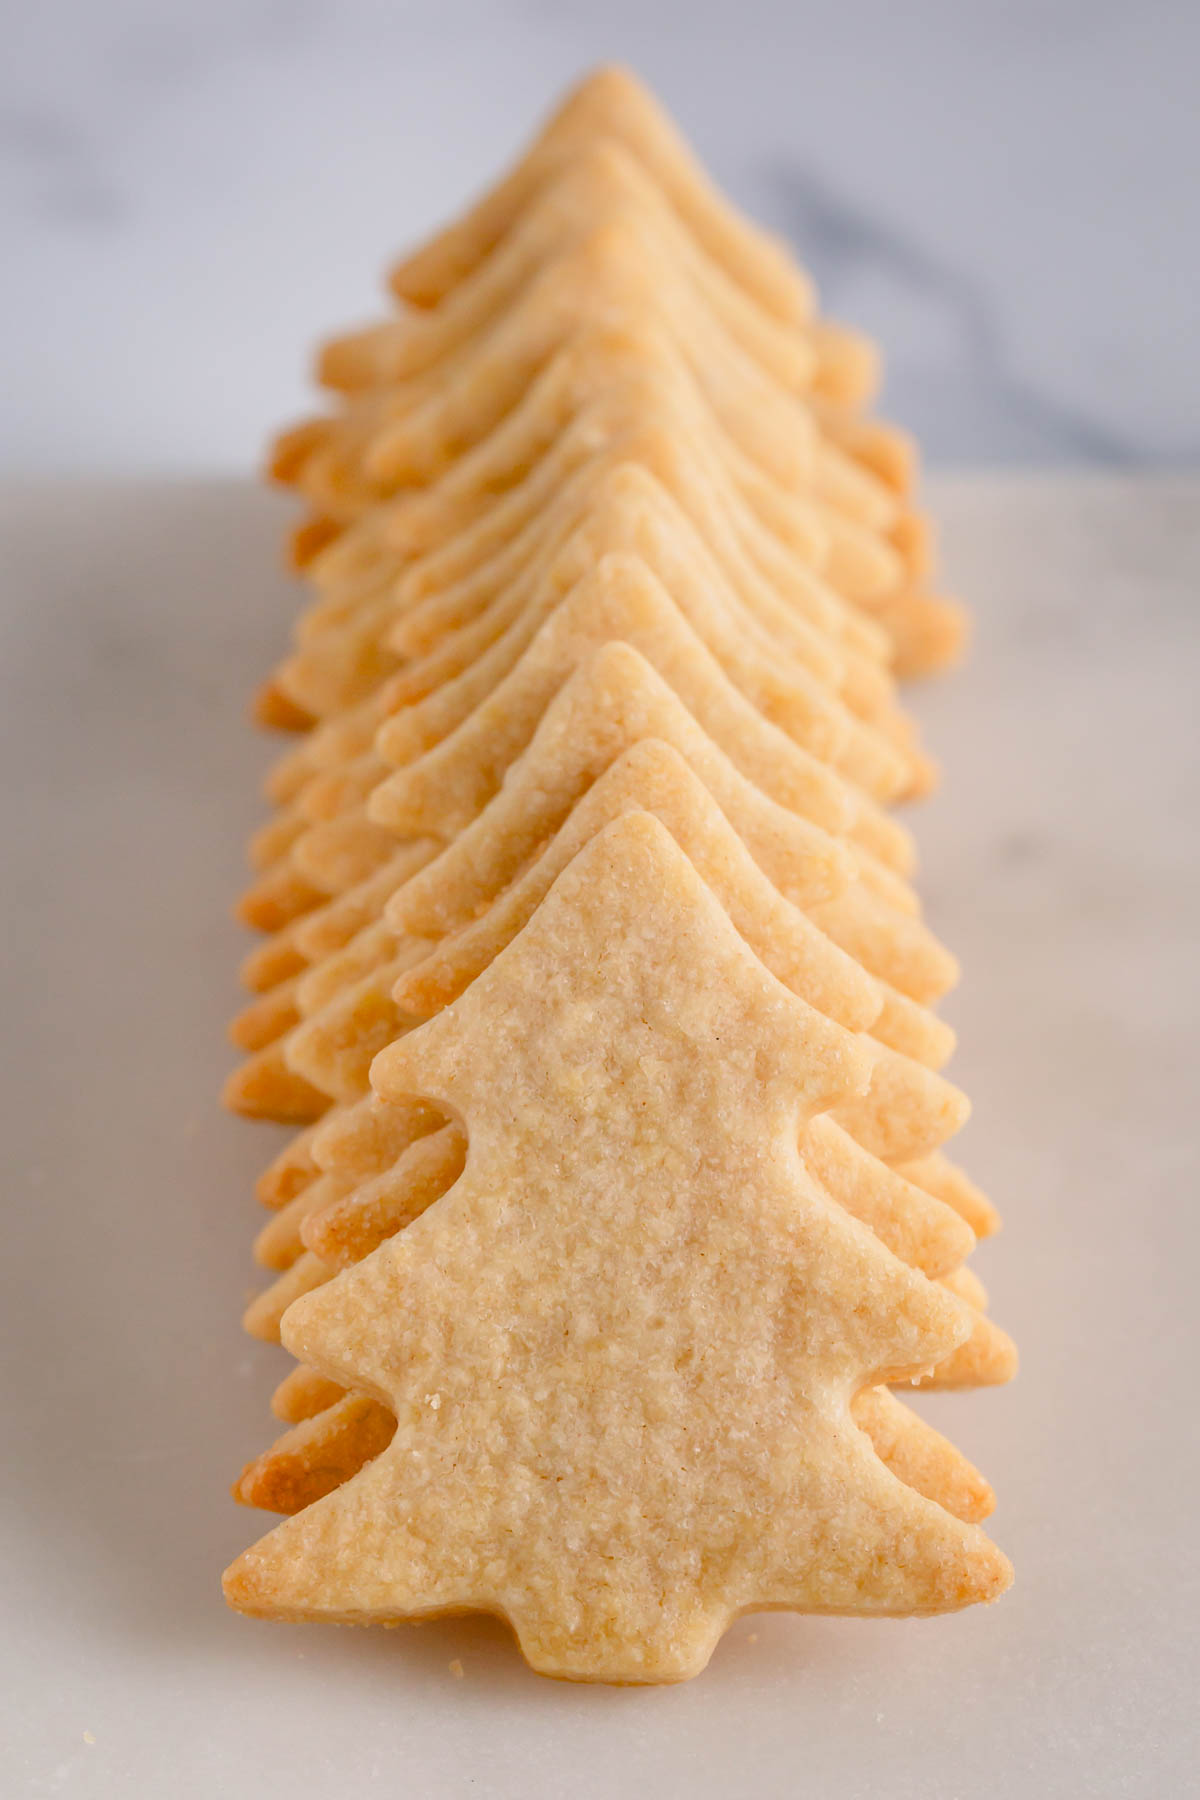 A stack of baked sugar cookies in the shape of Christmas trees.